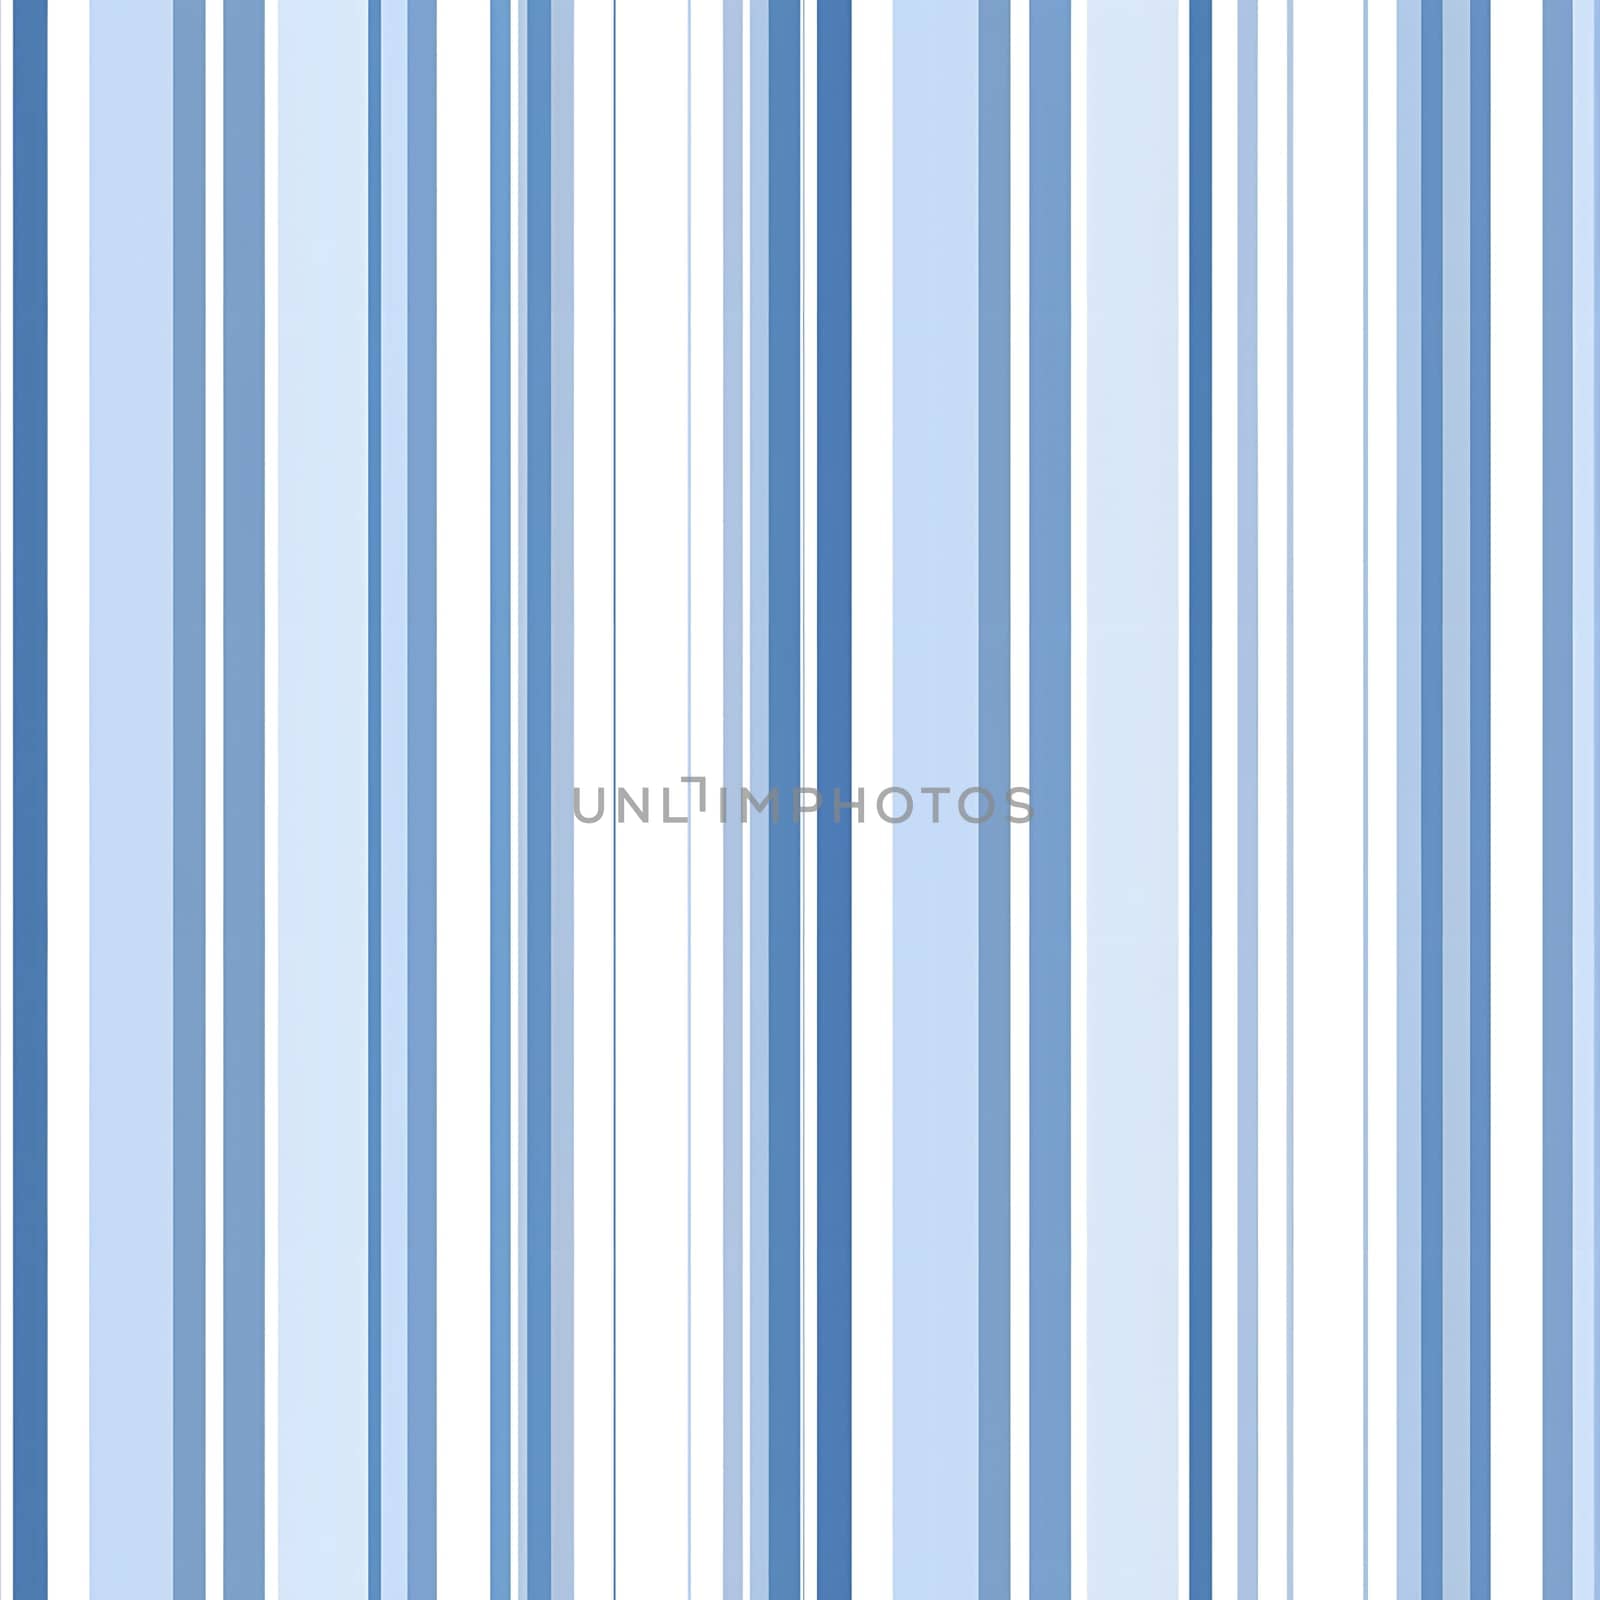 Symmetrical Electric Blue and Metal Parallel Pattern on White Background by Nadtochiy